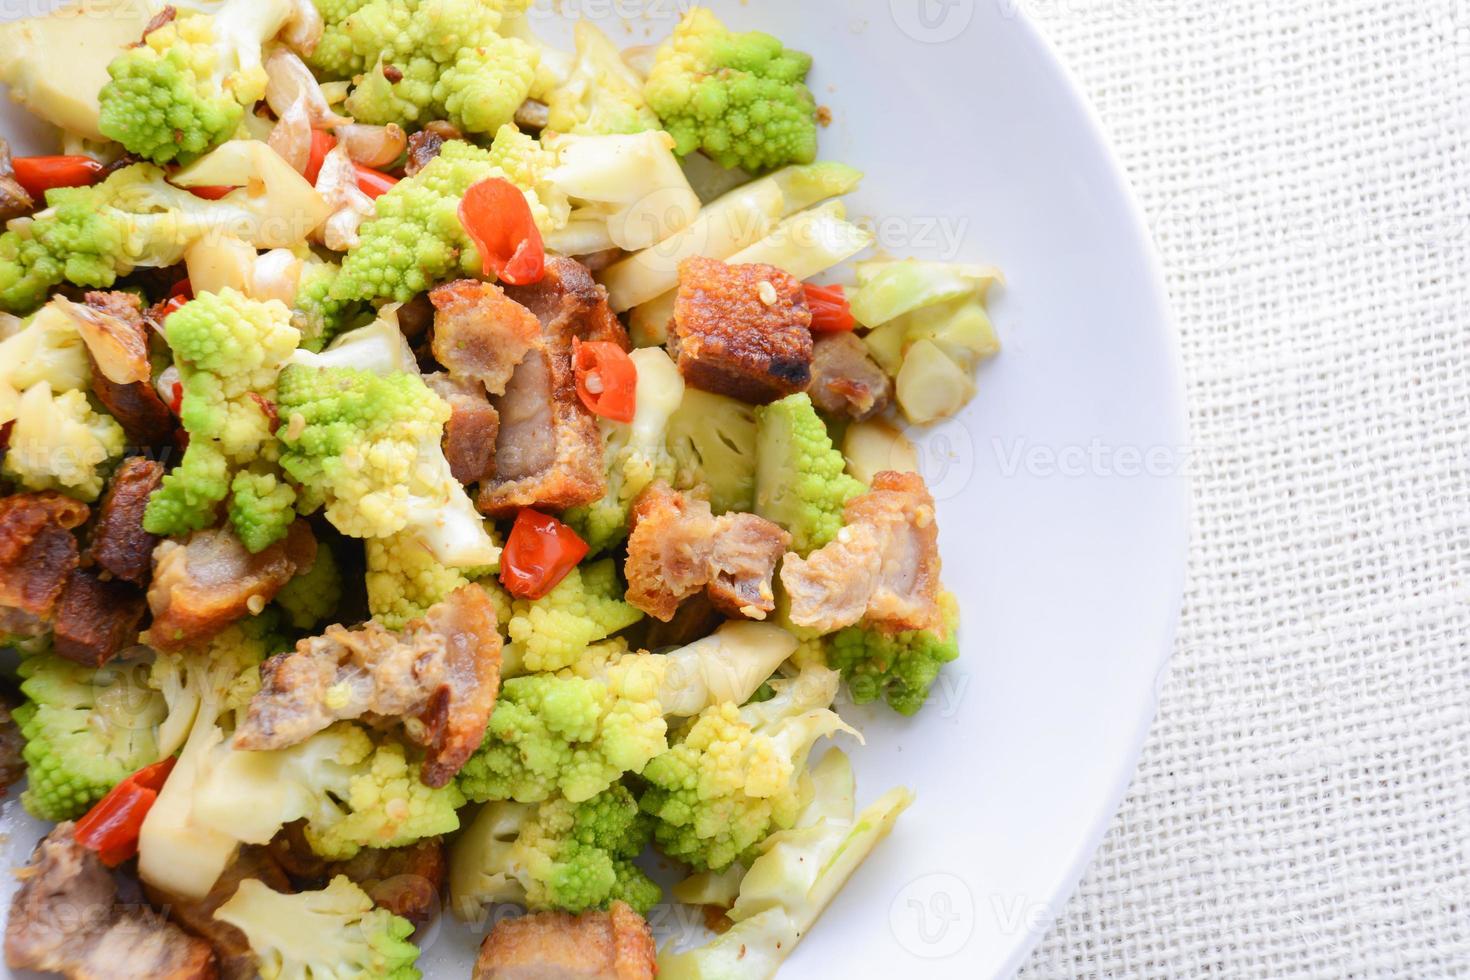 Stir fry Romanesco broccoli with crispy pork and chili, very healthy and delicious photo